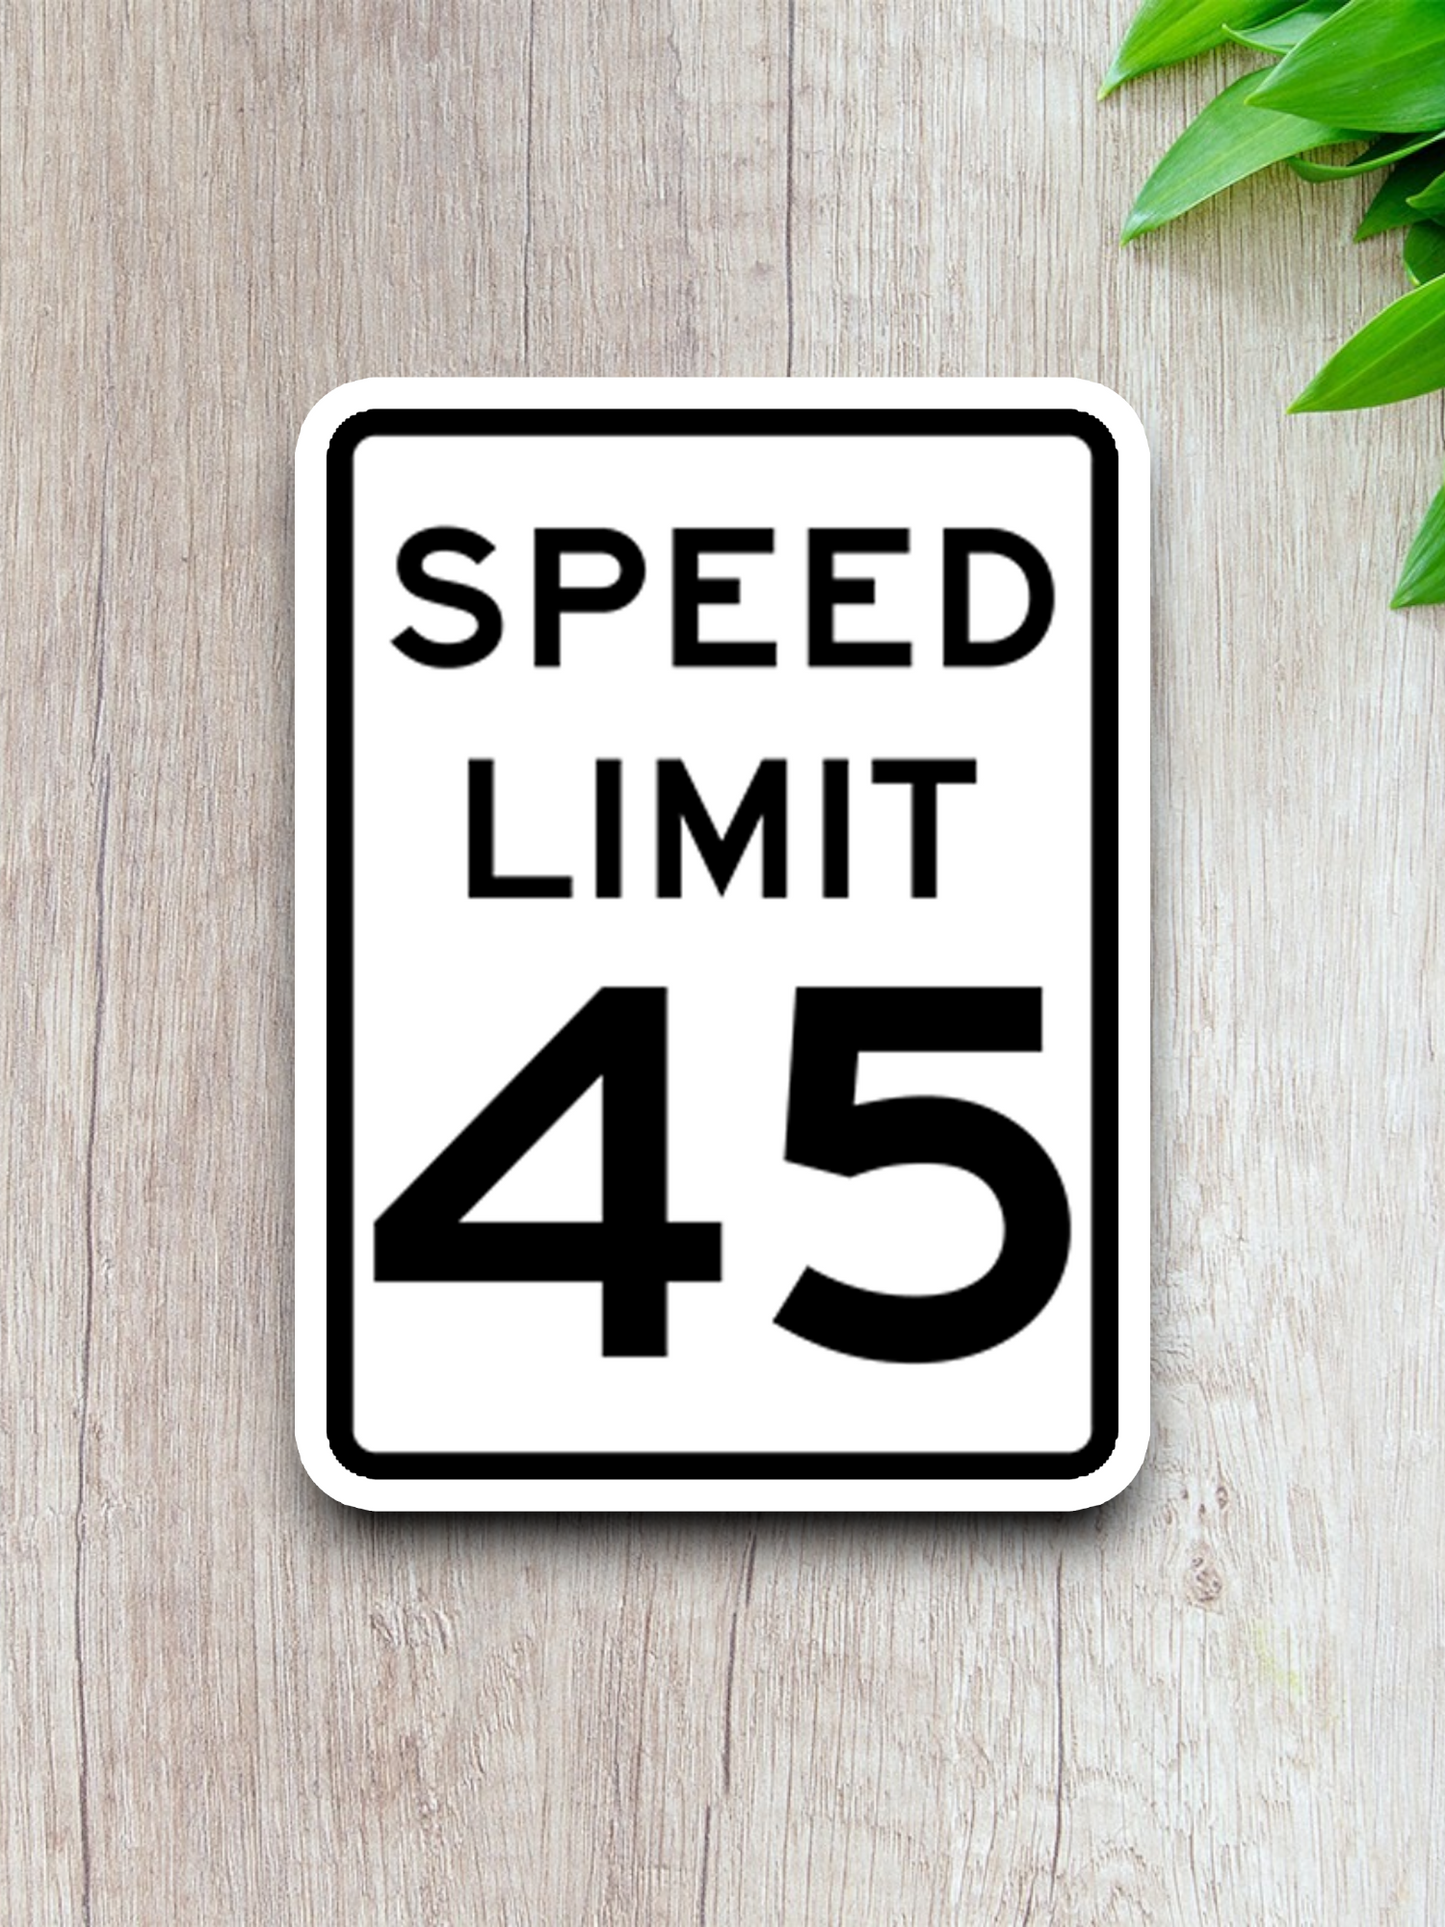 45 Miles Per Hour Speed Limit Road Sign Sticker